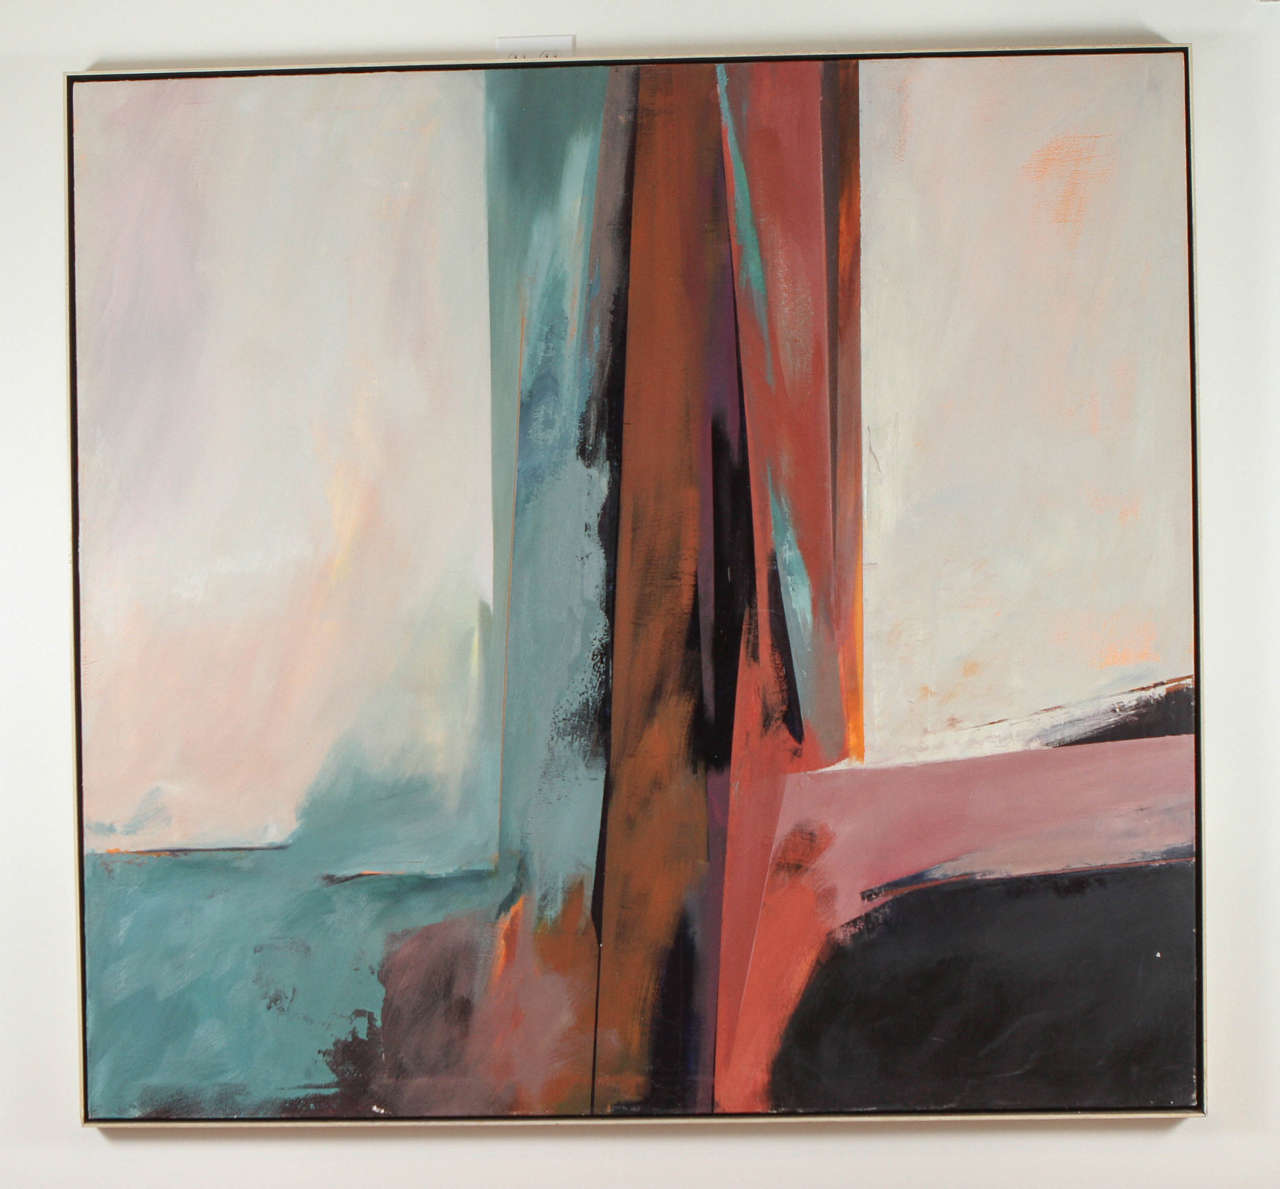 Large abstract oil painting by Kathleen Hammett. Gallery label on reverse reads: The Bonfoey Co., Cleveland, Ohio.